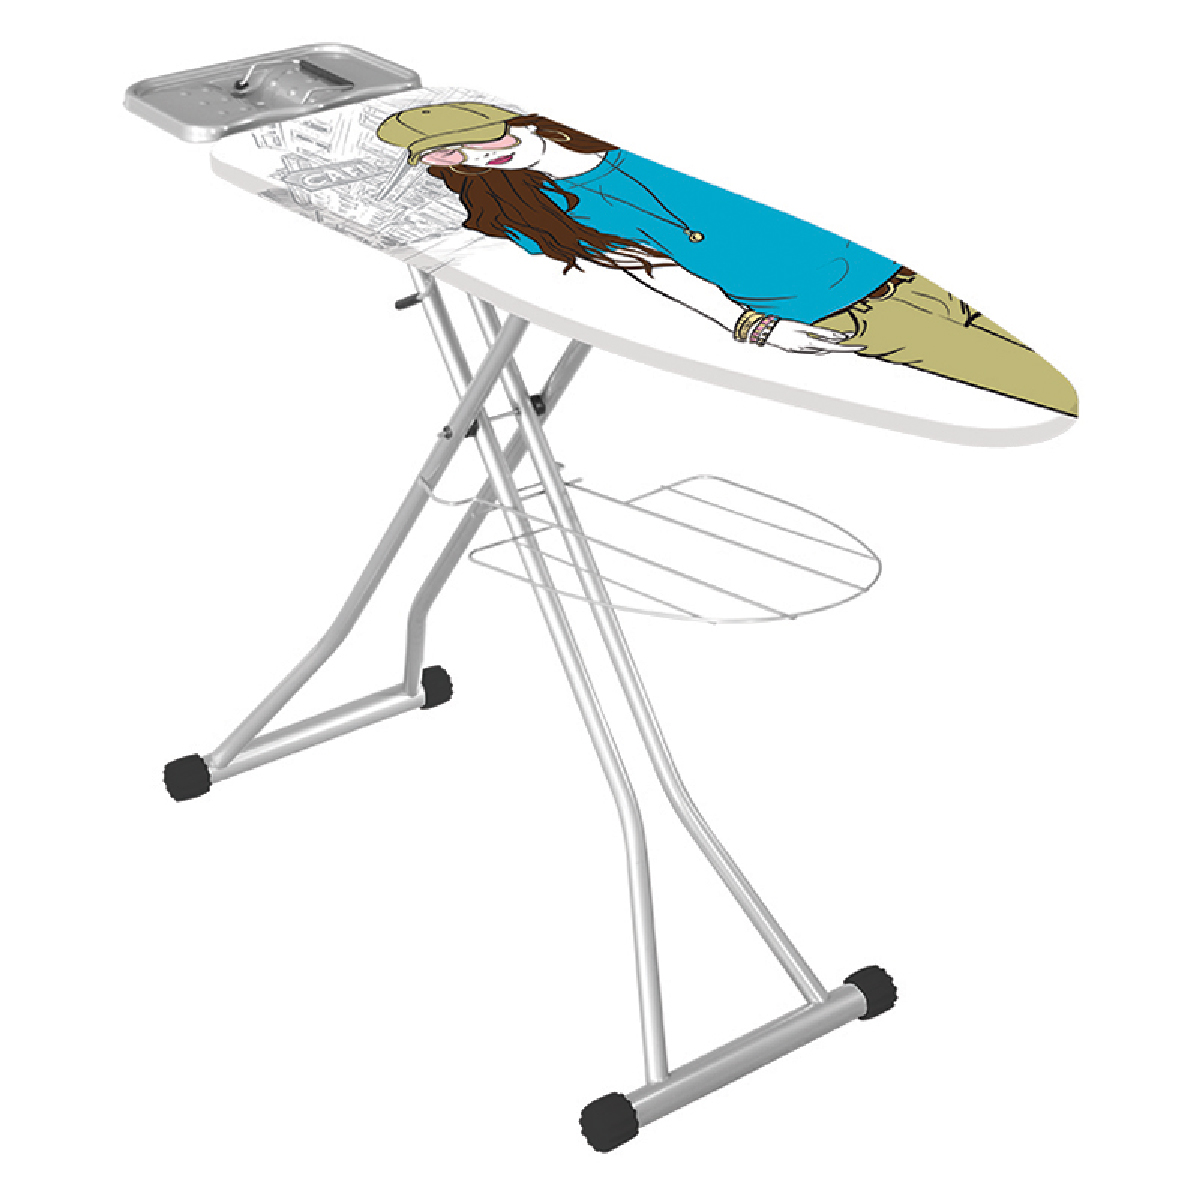 Focus Iron Board, Adjustable Height From 60 To 90Cm, Monoblock Ironing Surface, Special Linen Rack, EGE 18315